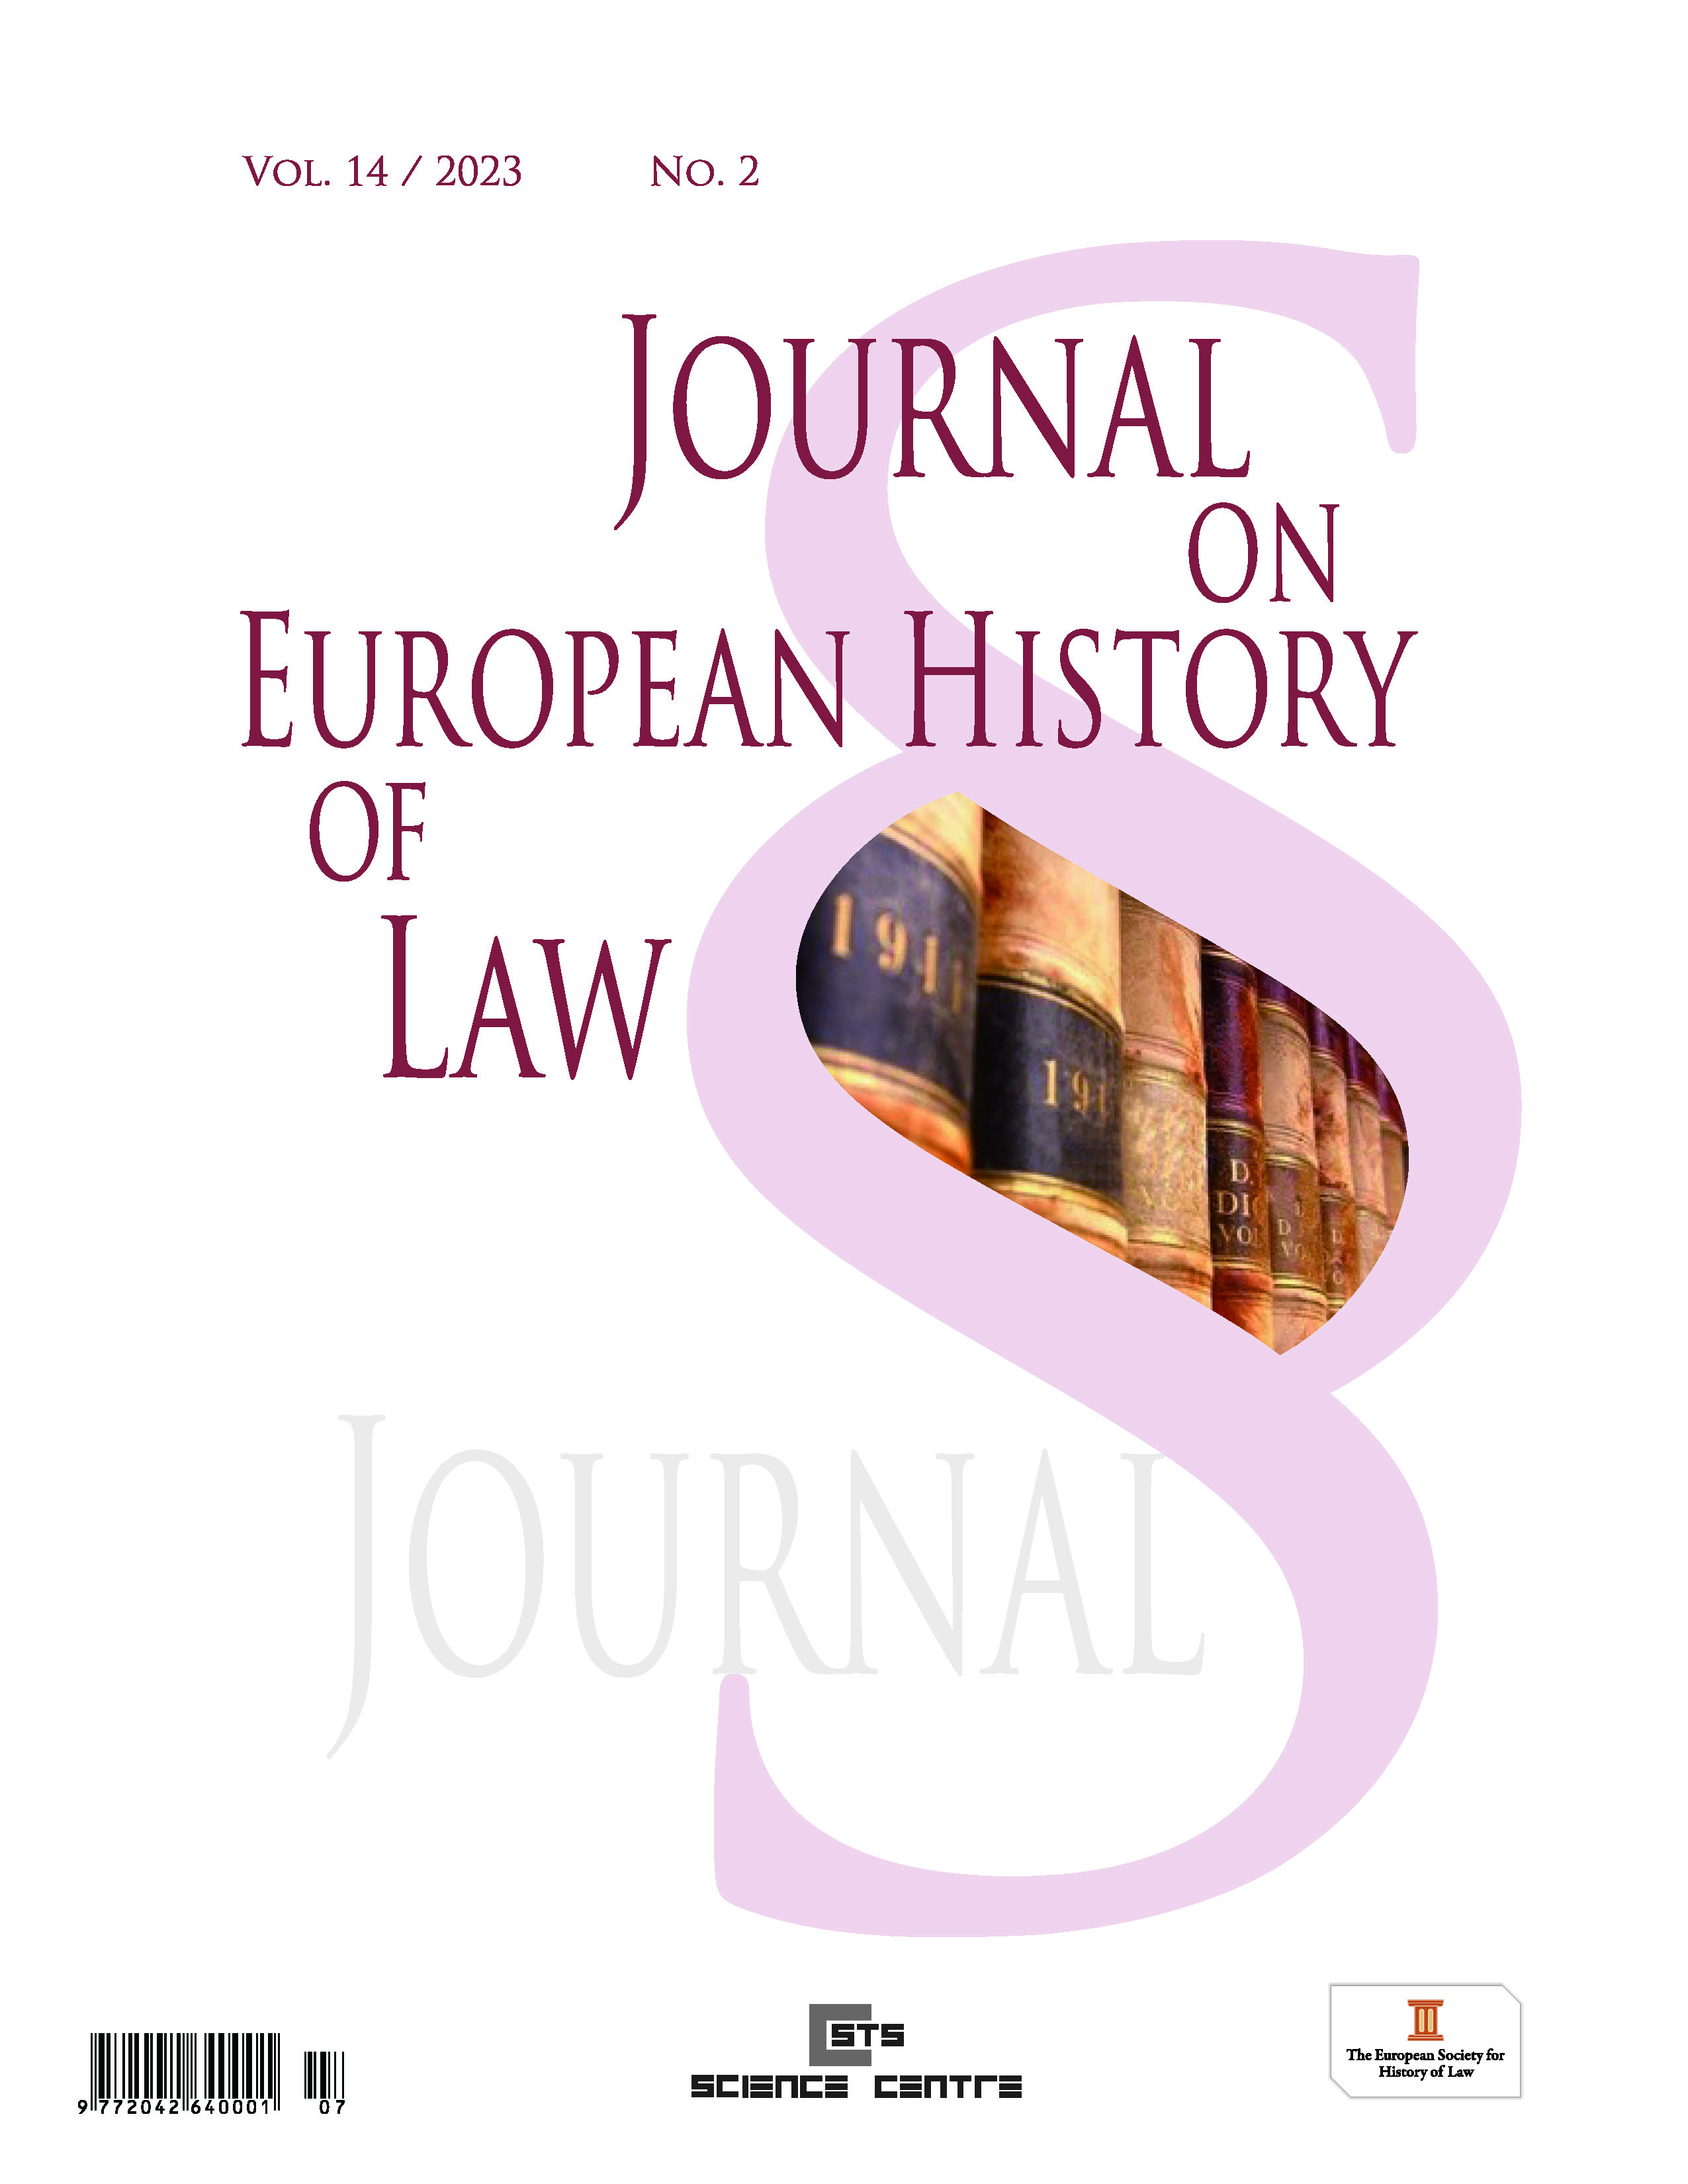 					View Vol. 14 No. 2 (2023): Journal on European History of Law 14/2023, Issue 2
				